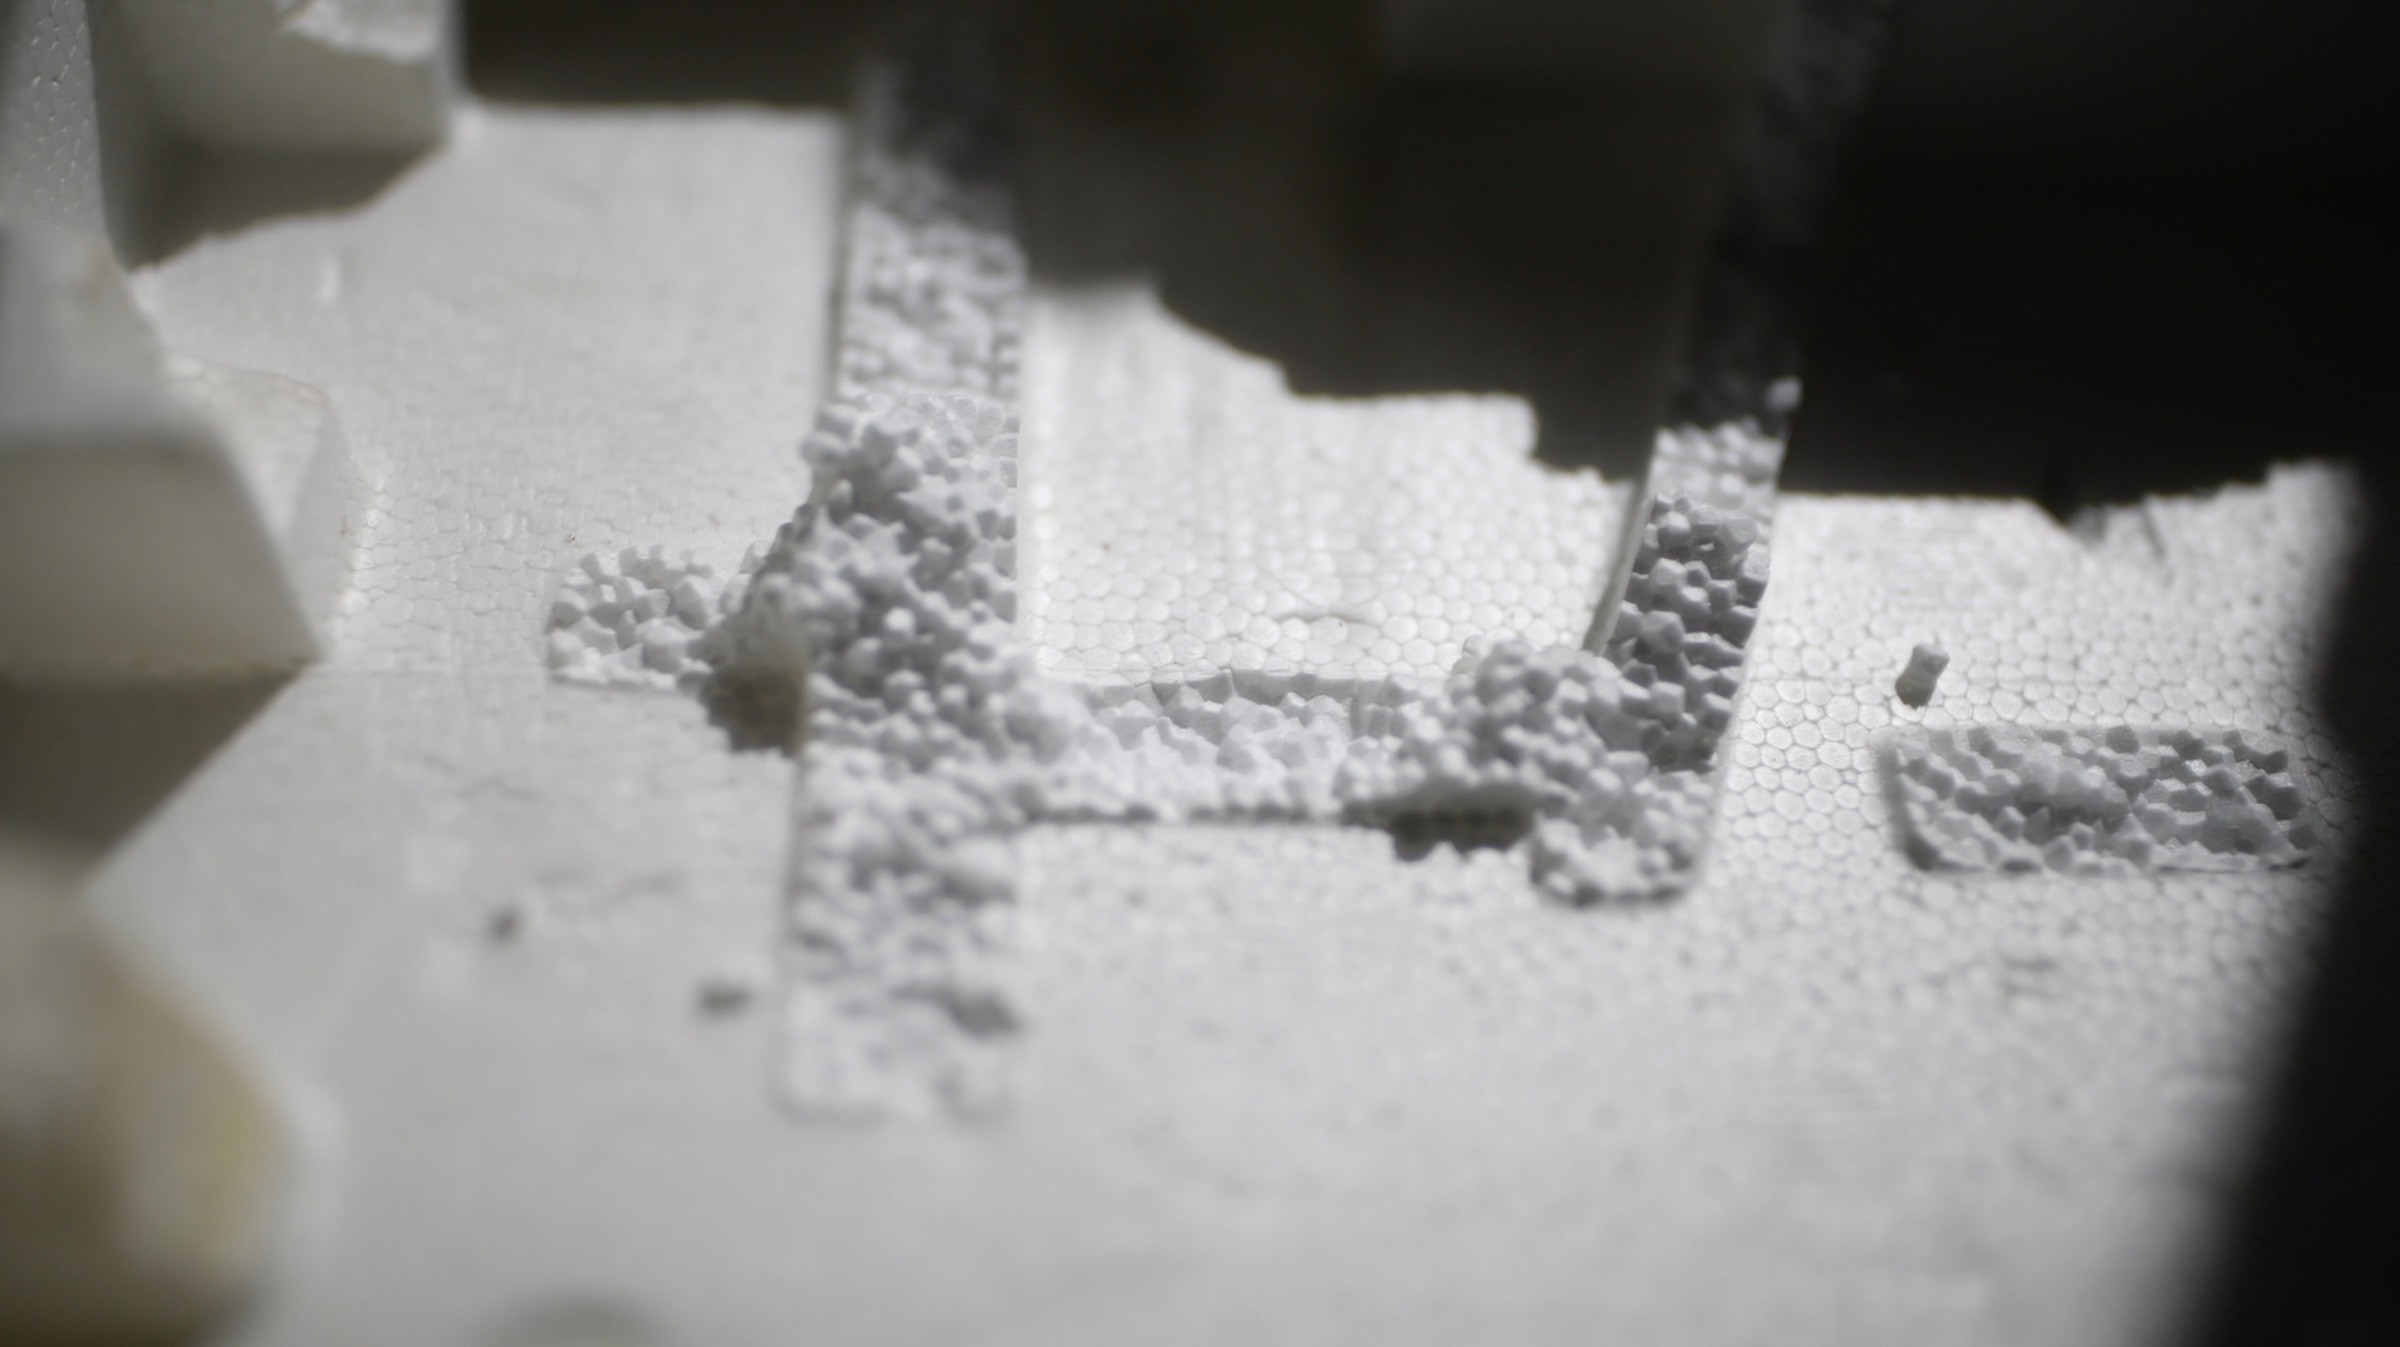 This horizontal image is a still from a film. It’s an extreme close-up shot of white Styrofoam.